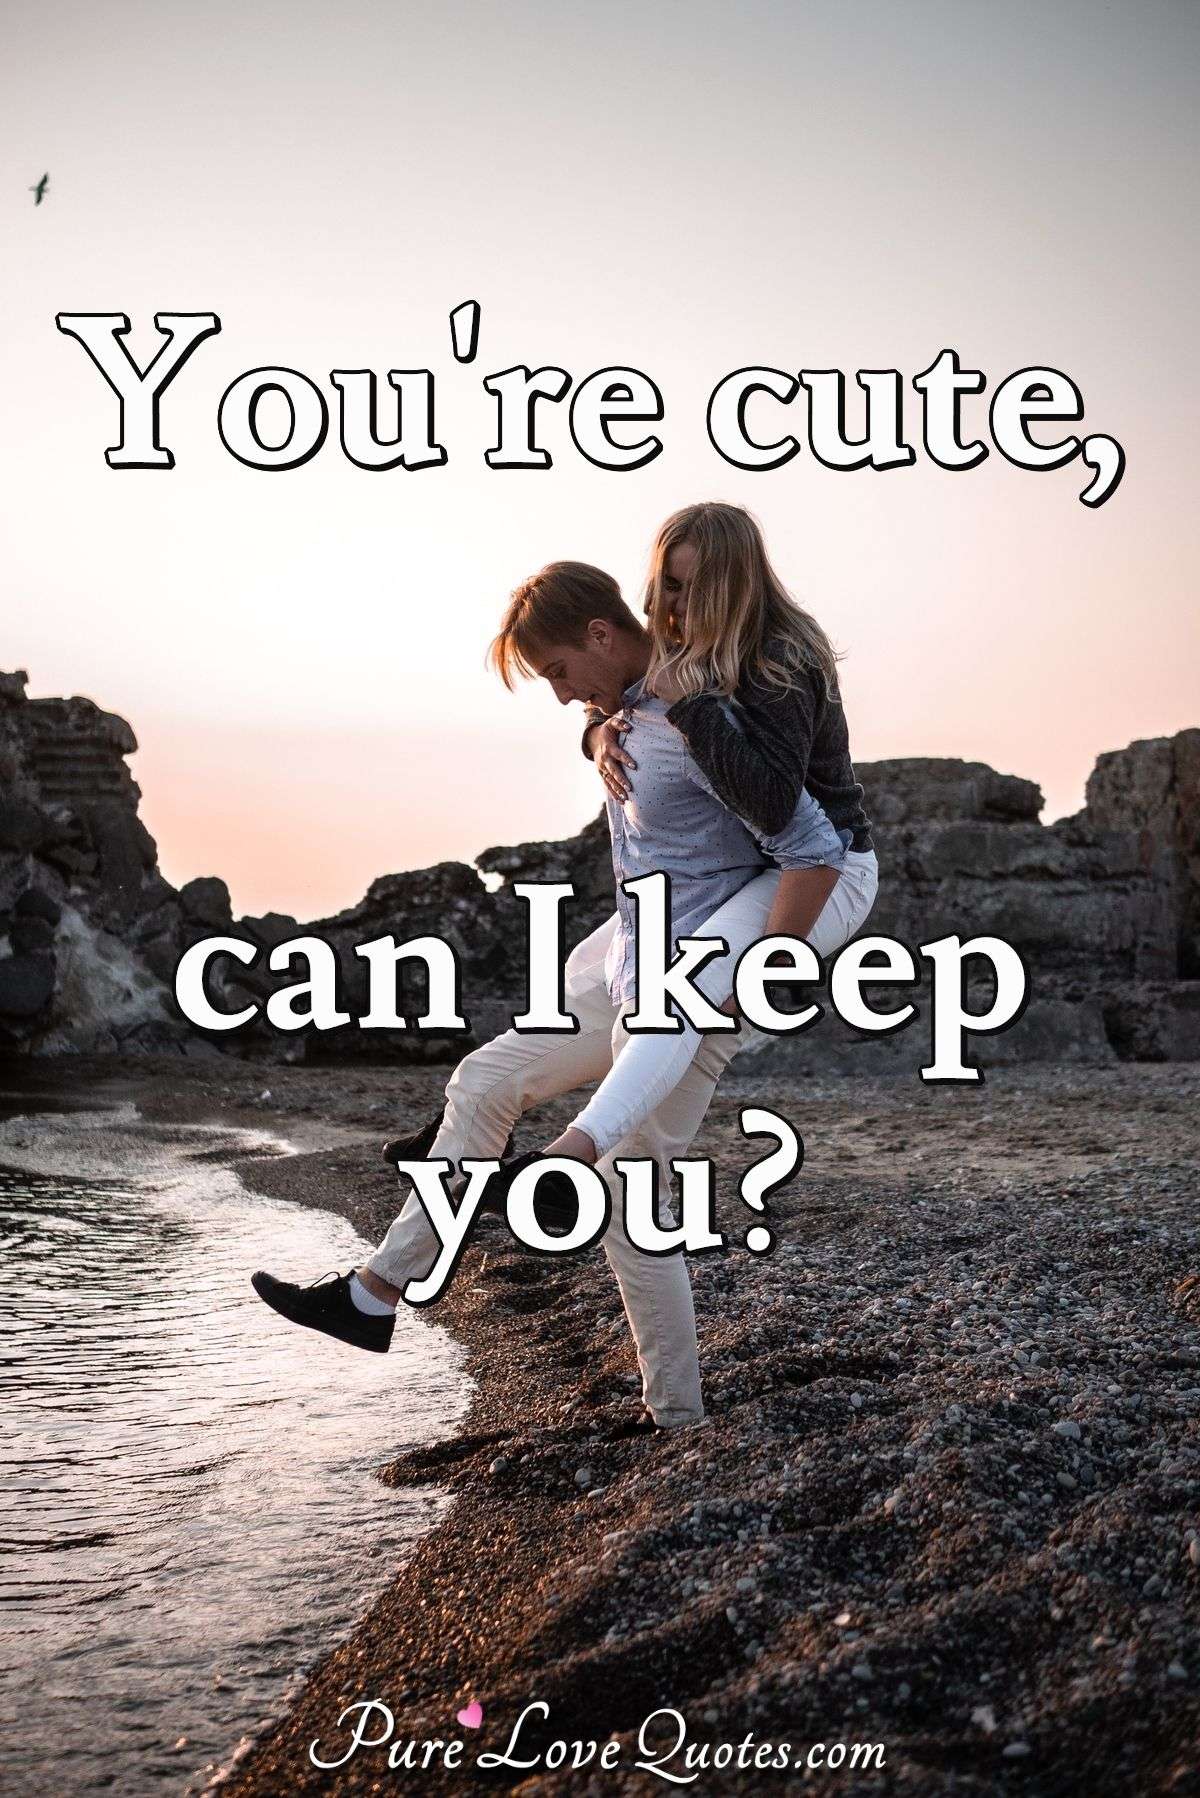 your cute Pick-up lines that will make anyone smile